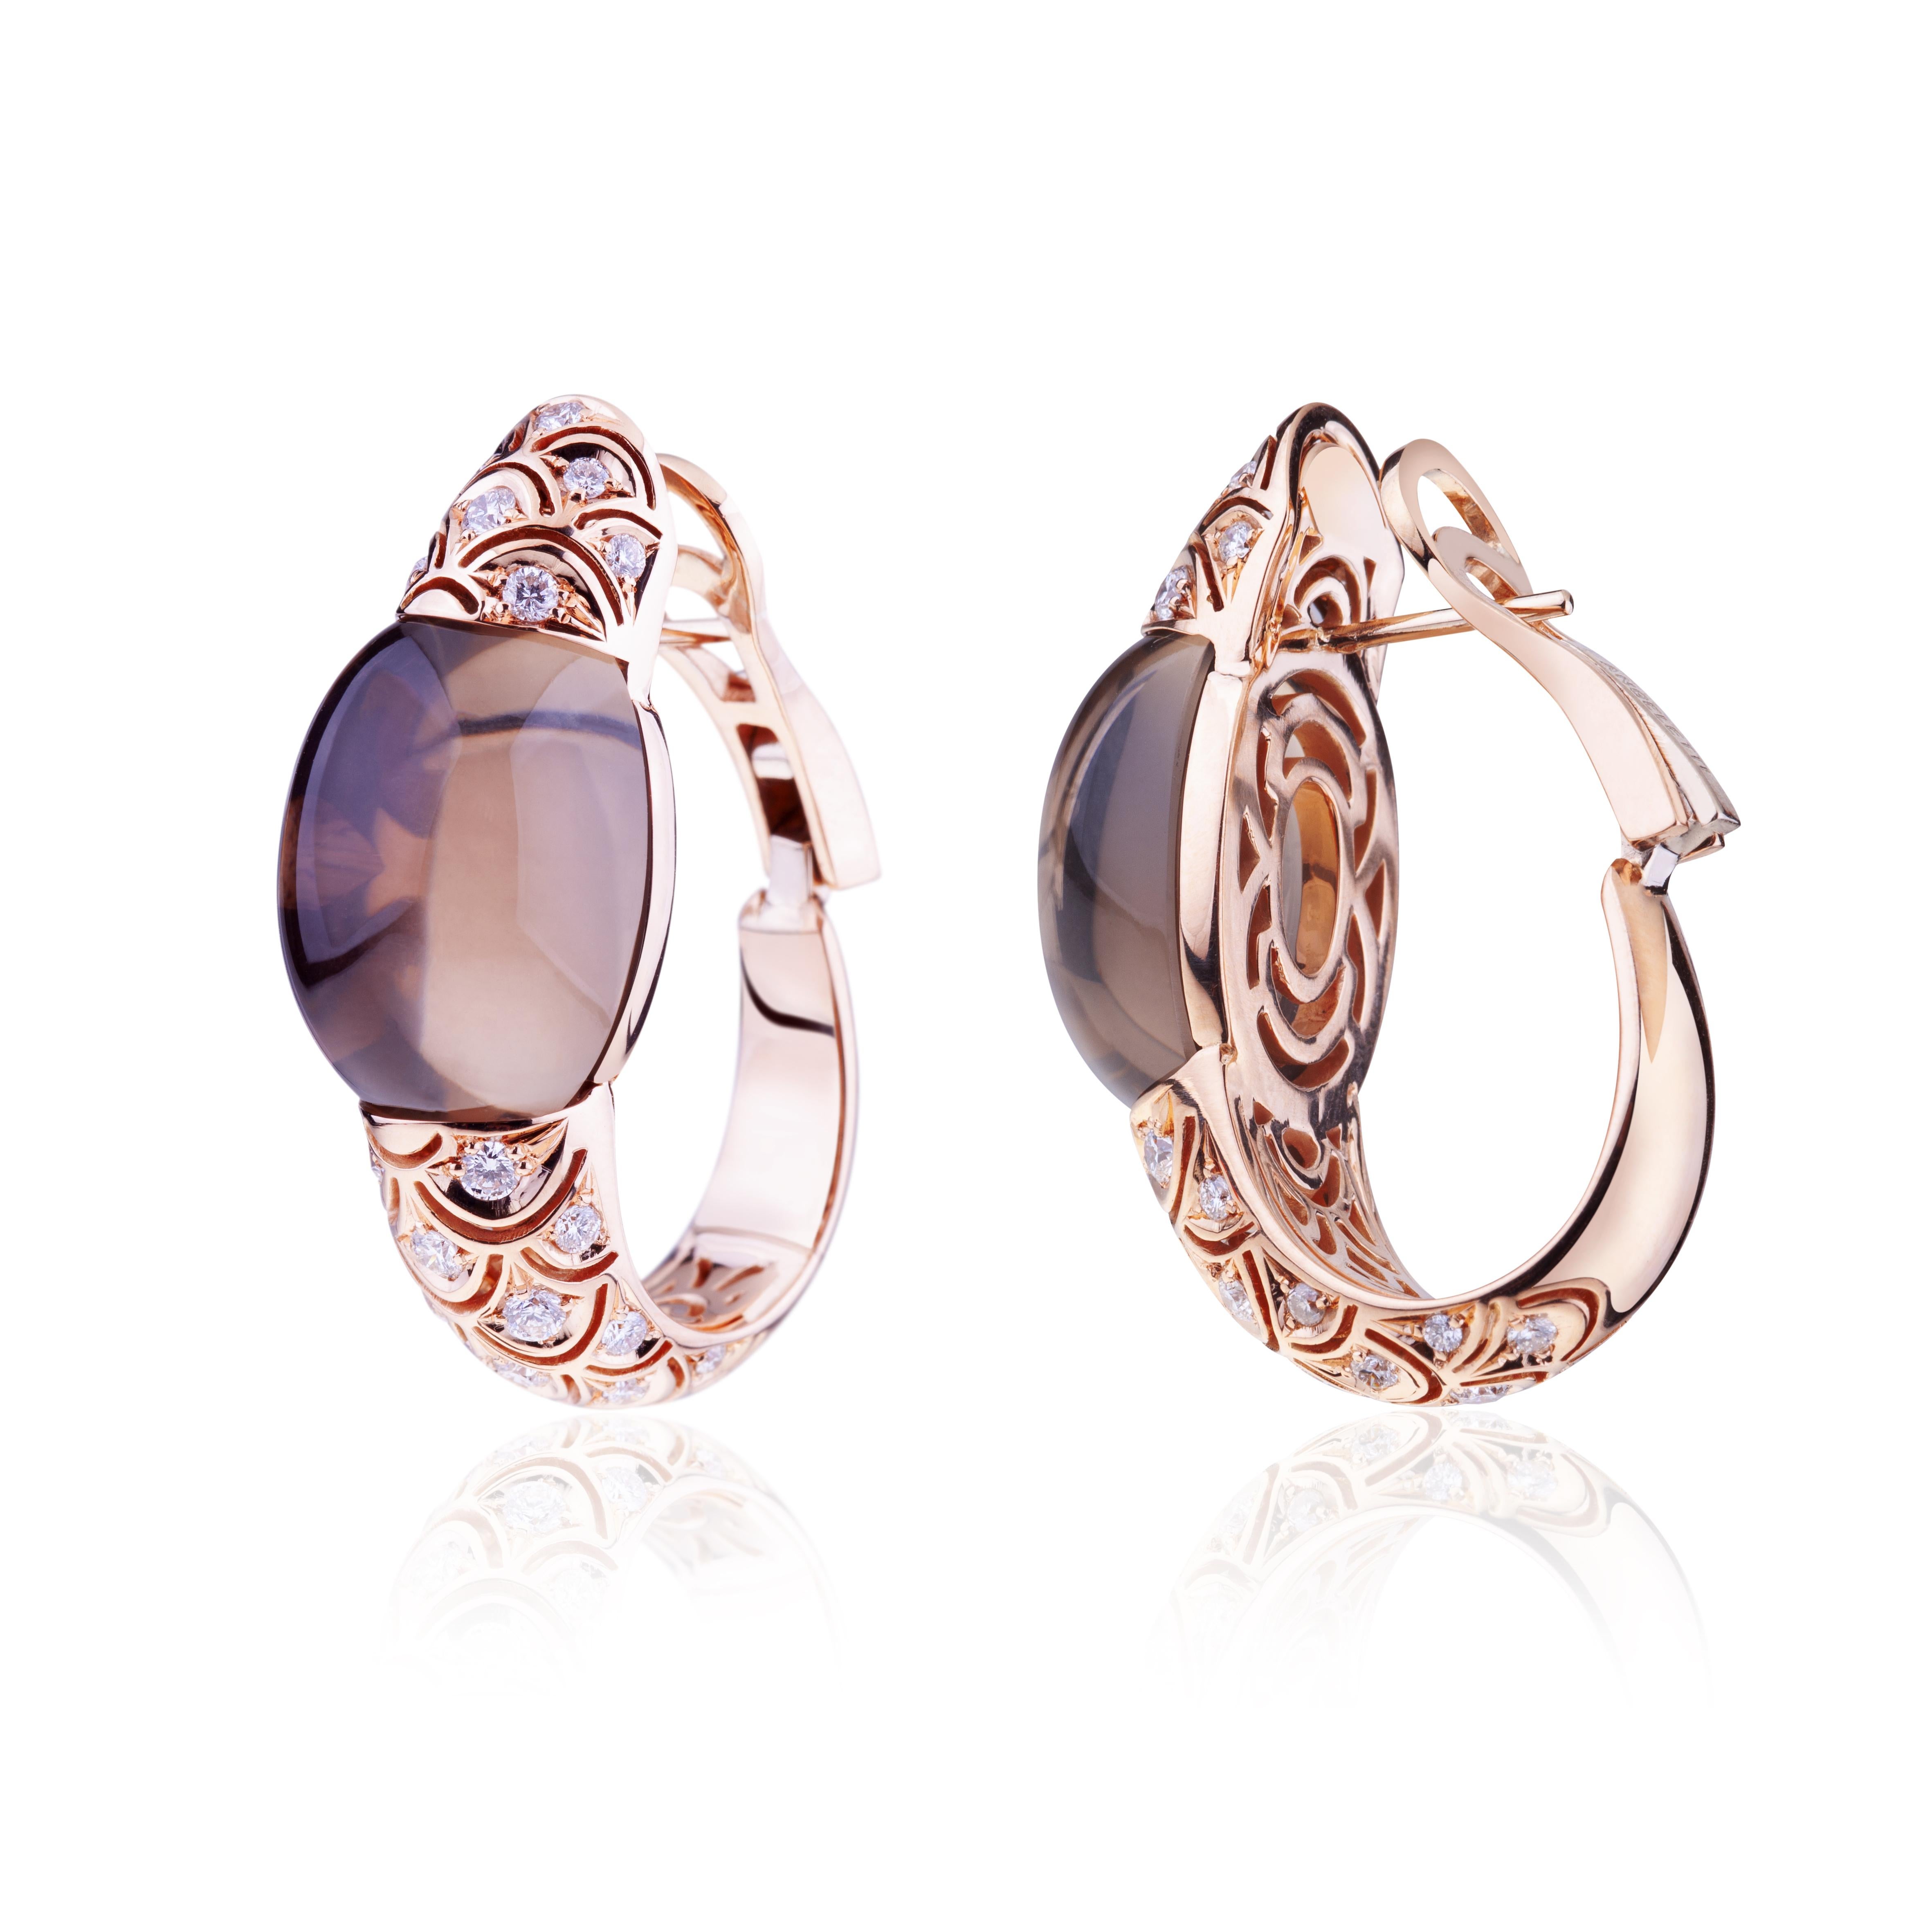 Angeletti Embrace Rose Gold With Diamond and Cabochon Smoky Quarz Hoop Earrings
New Wave Version, Designed and Manifactured in Rome. Large size and impressive proportions. 
Angeletti Boasts an Exceptional History Made of Pure Jewelry Tradition, a